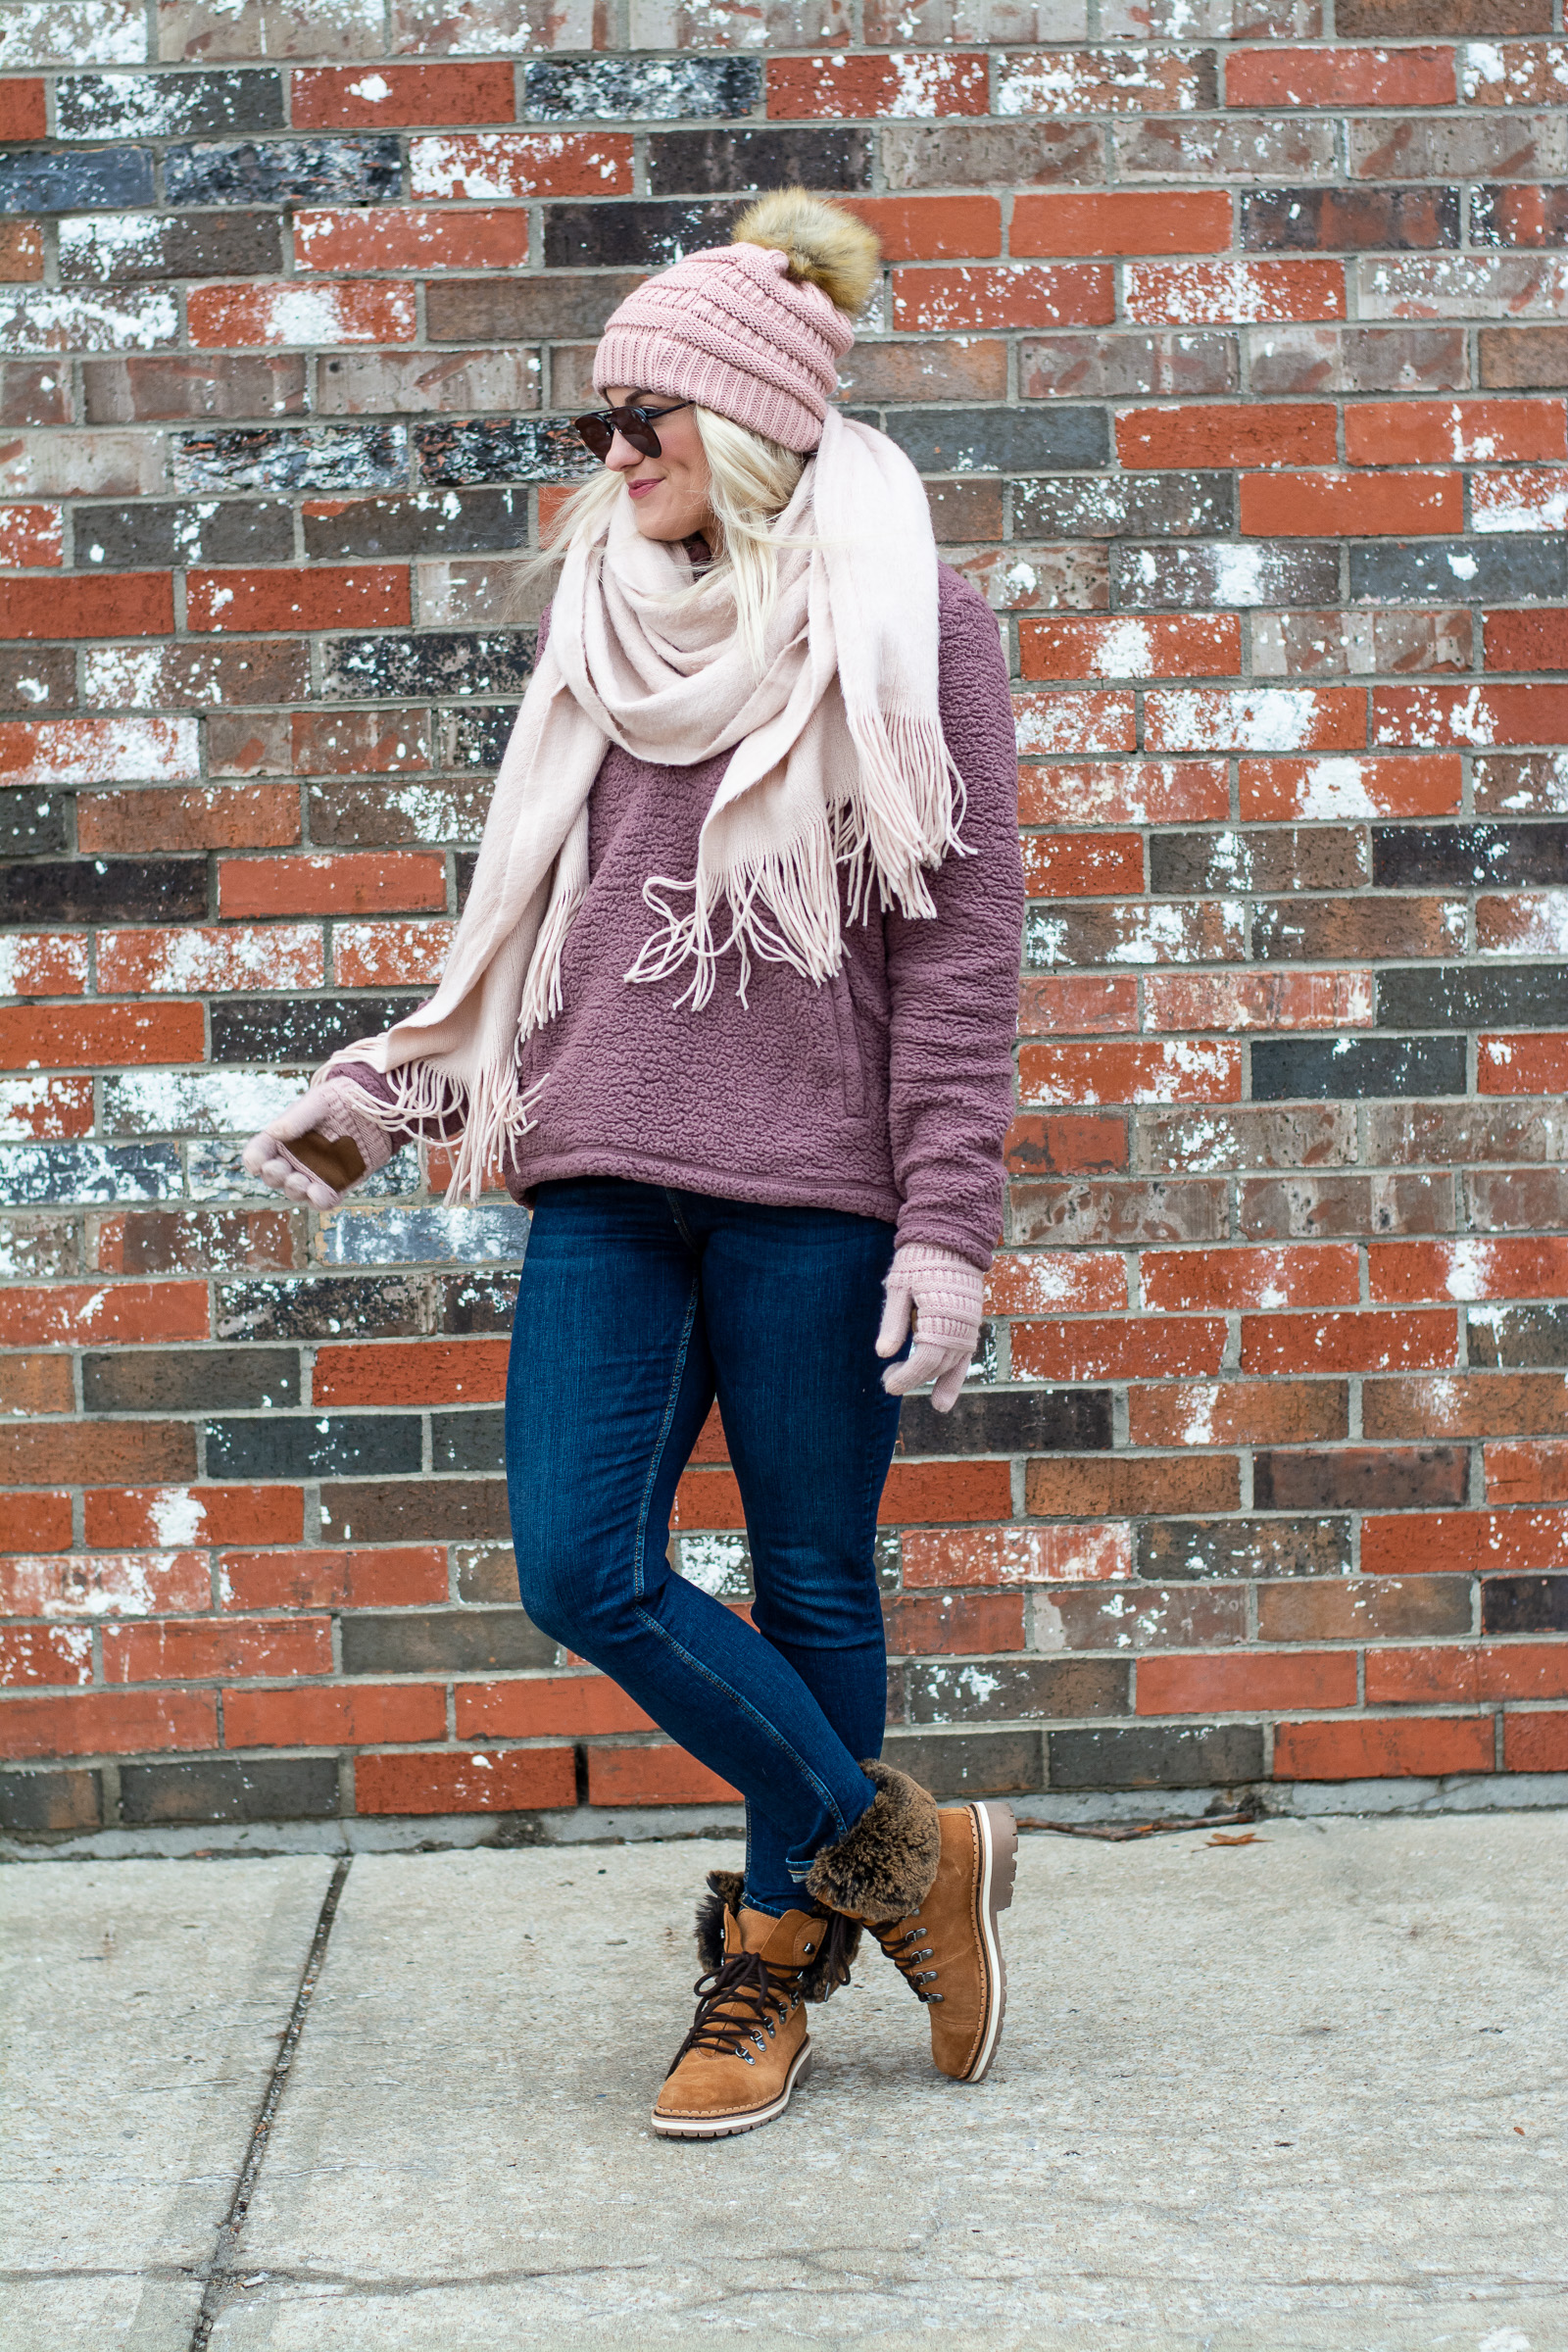 Cozy Sherpa + Winter Boots. | Ashley from LSR